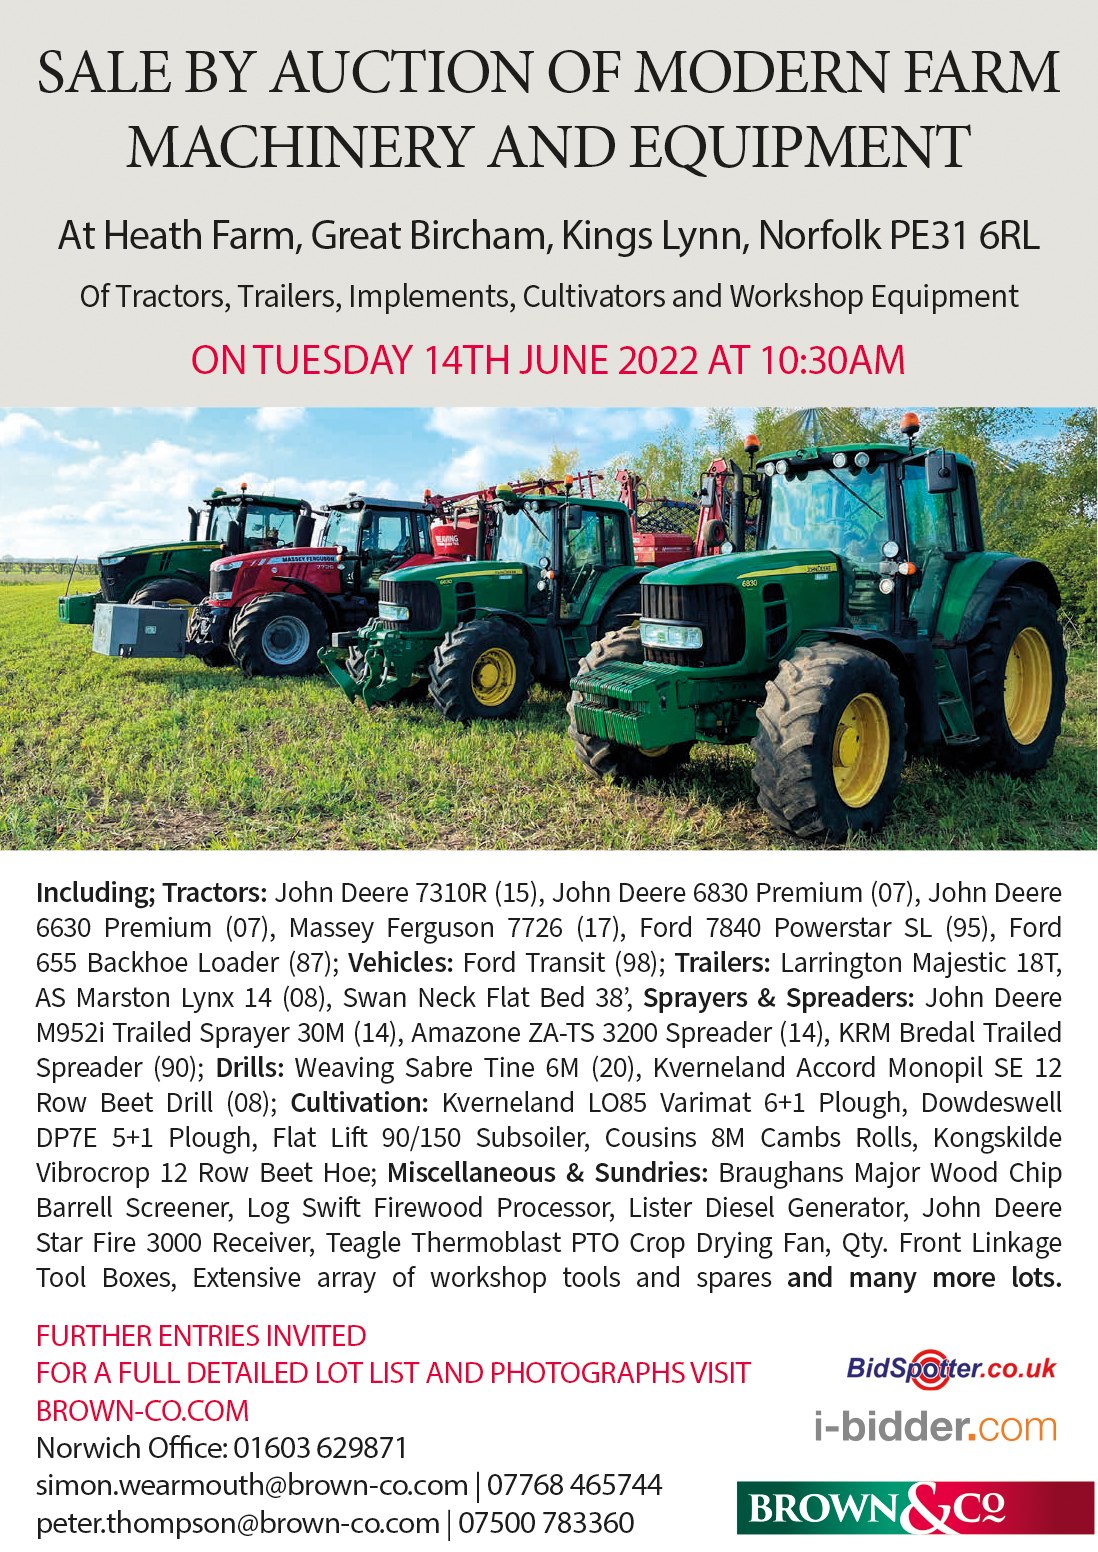 SALE BY AUCTION OF MODERN FARM MACHINERY AND EQUIPMENT Farmers Guide